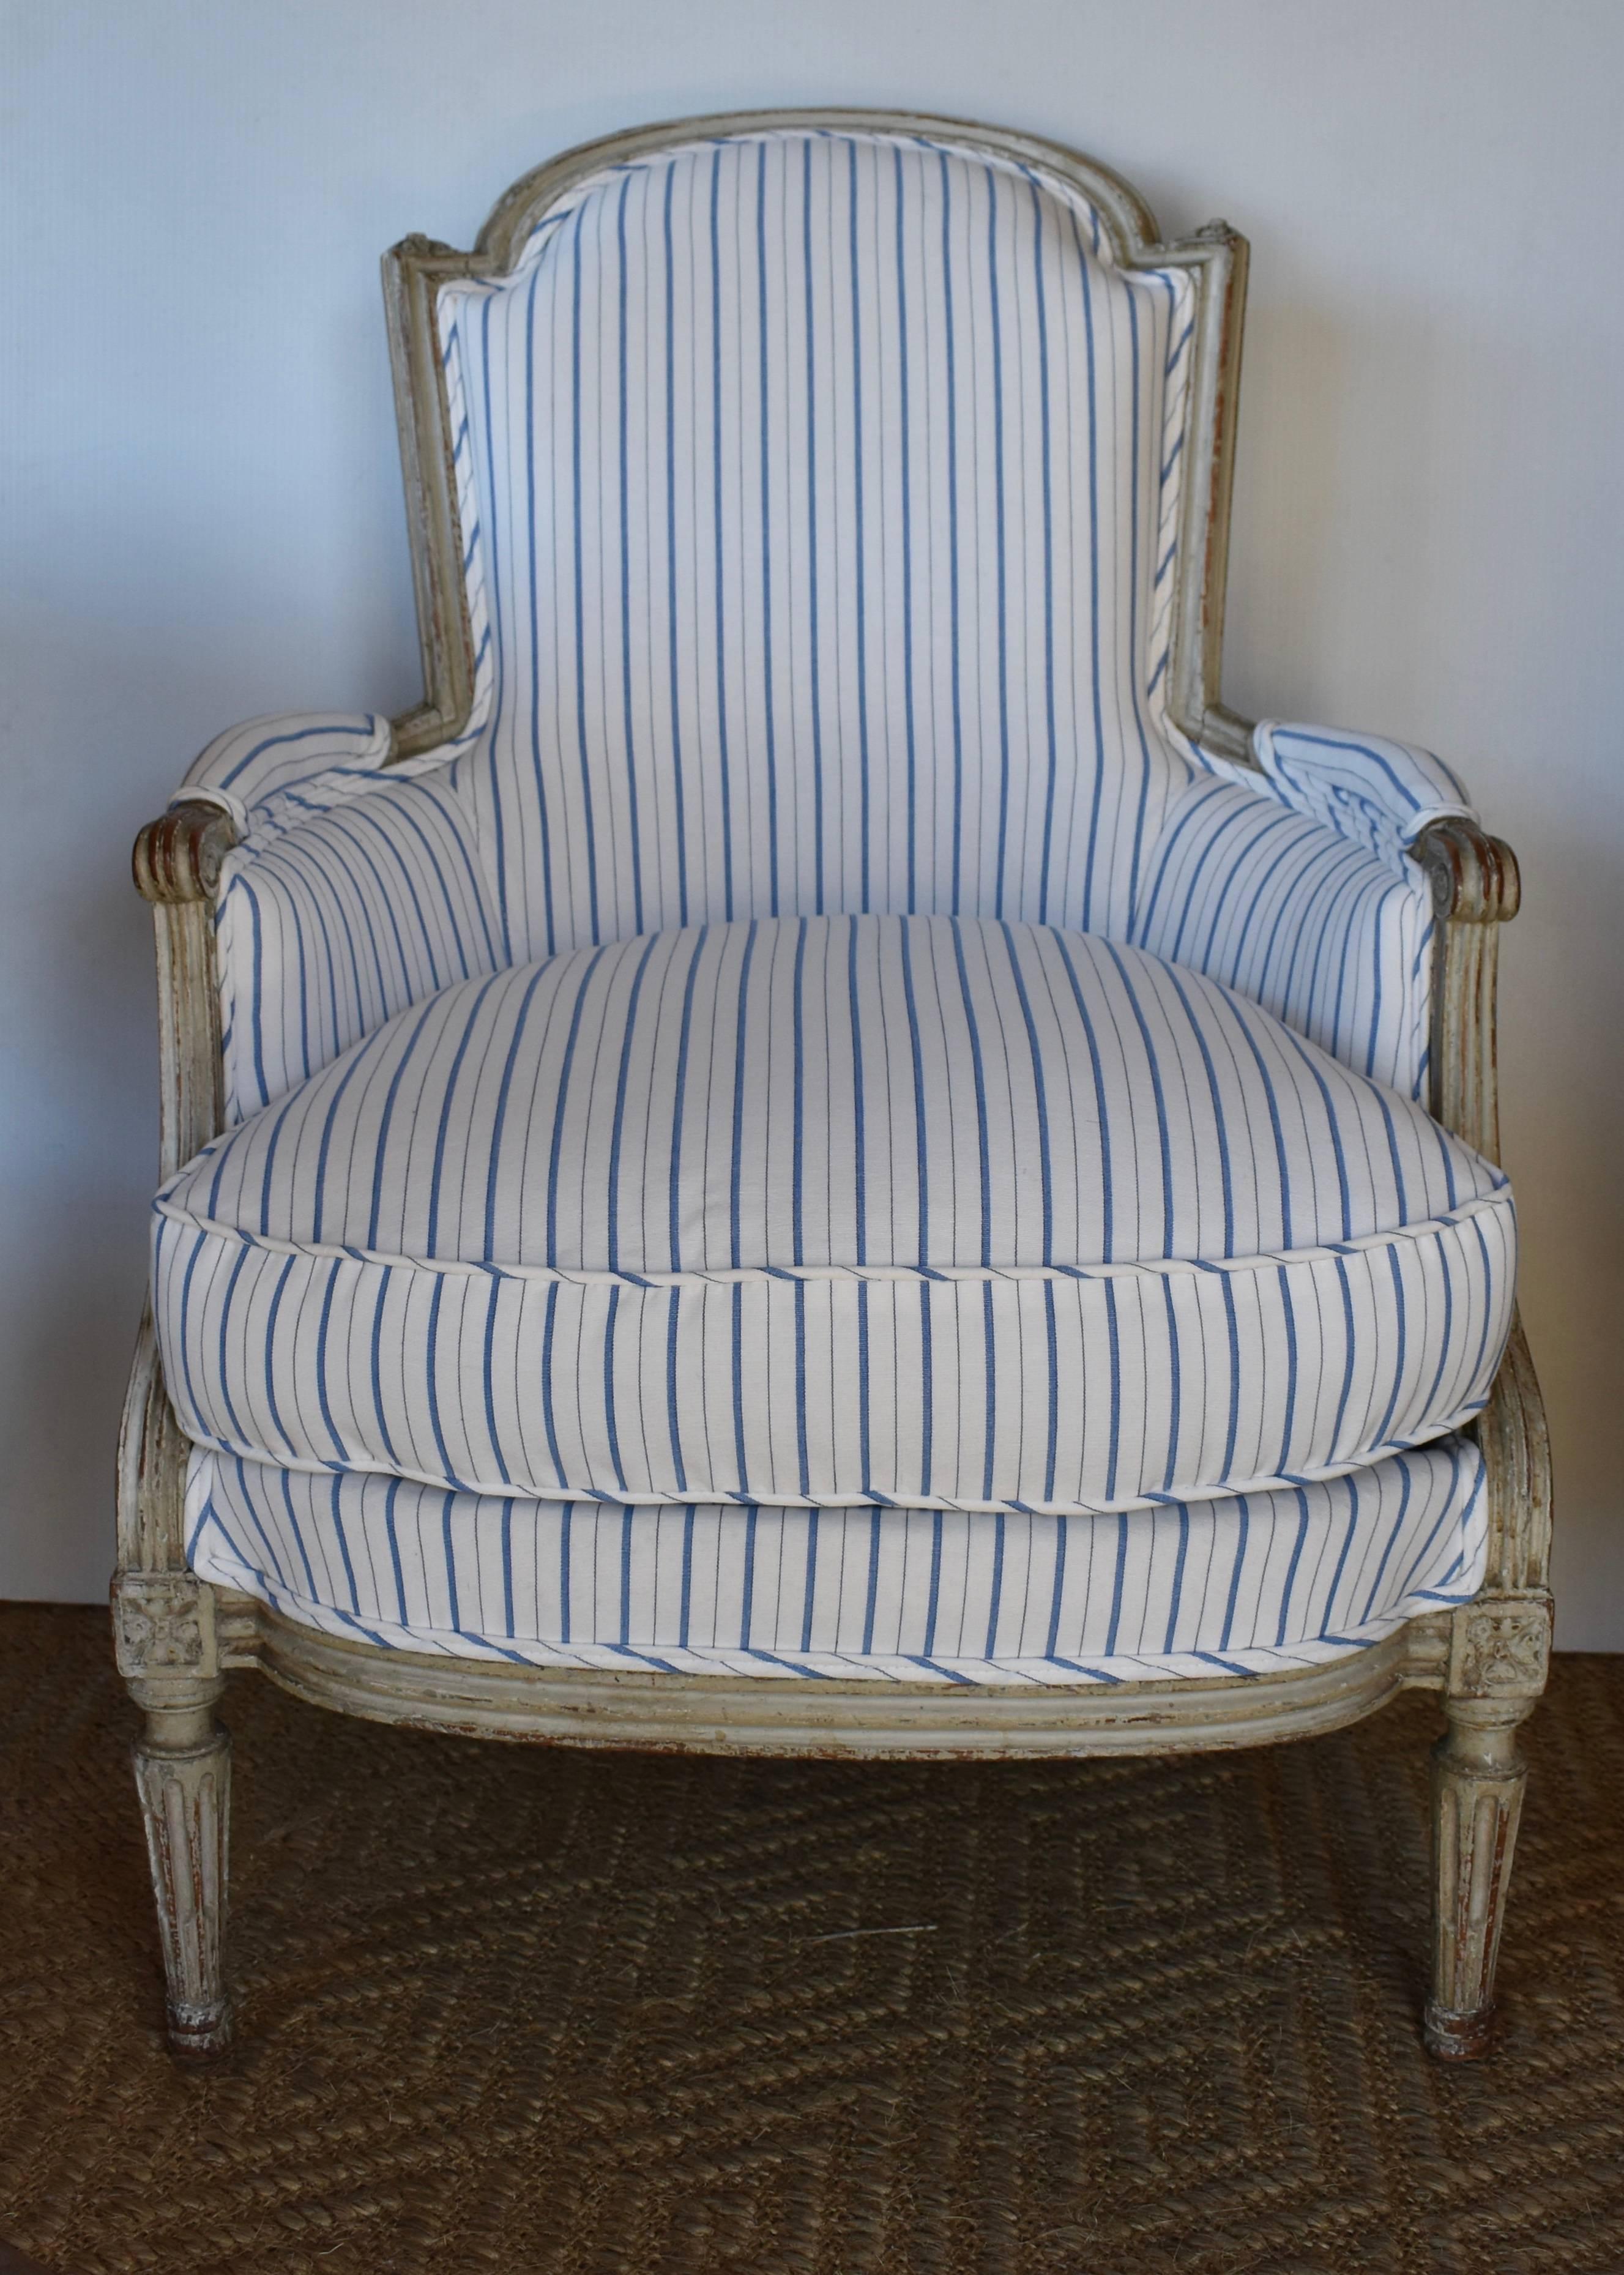 Beautiful 19th century painted French Bergere newly upholstered in blue and white stripe. Lovely carved arms and tapered legs. Great aged patina. Very comfortable with down filled cushion.